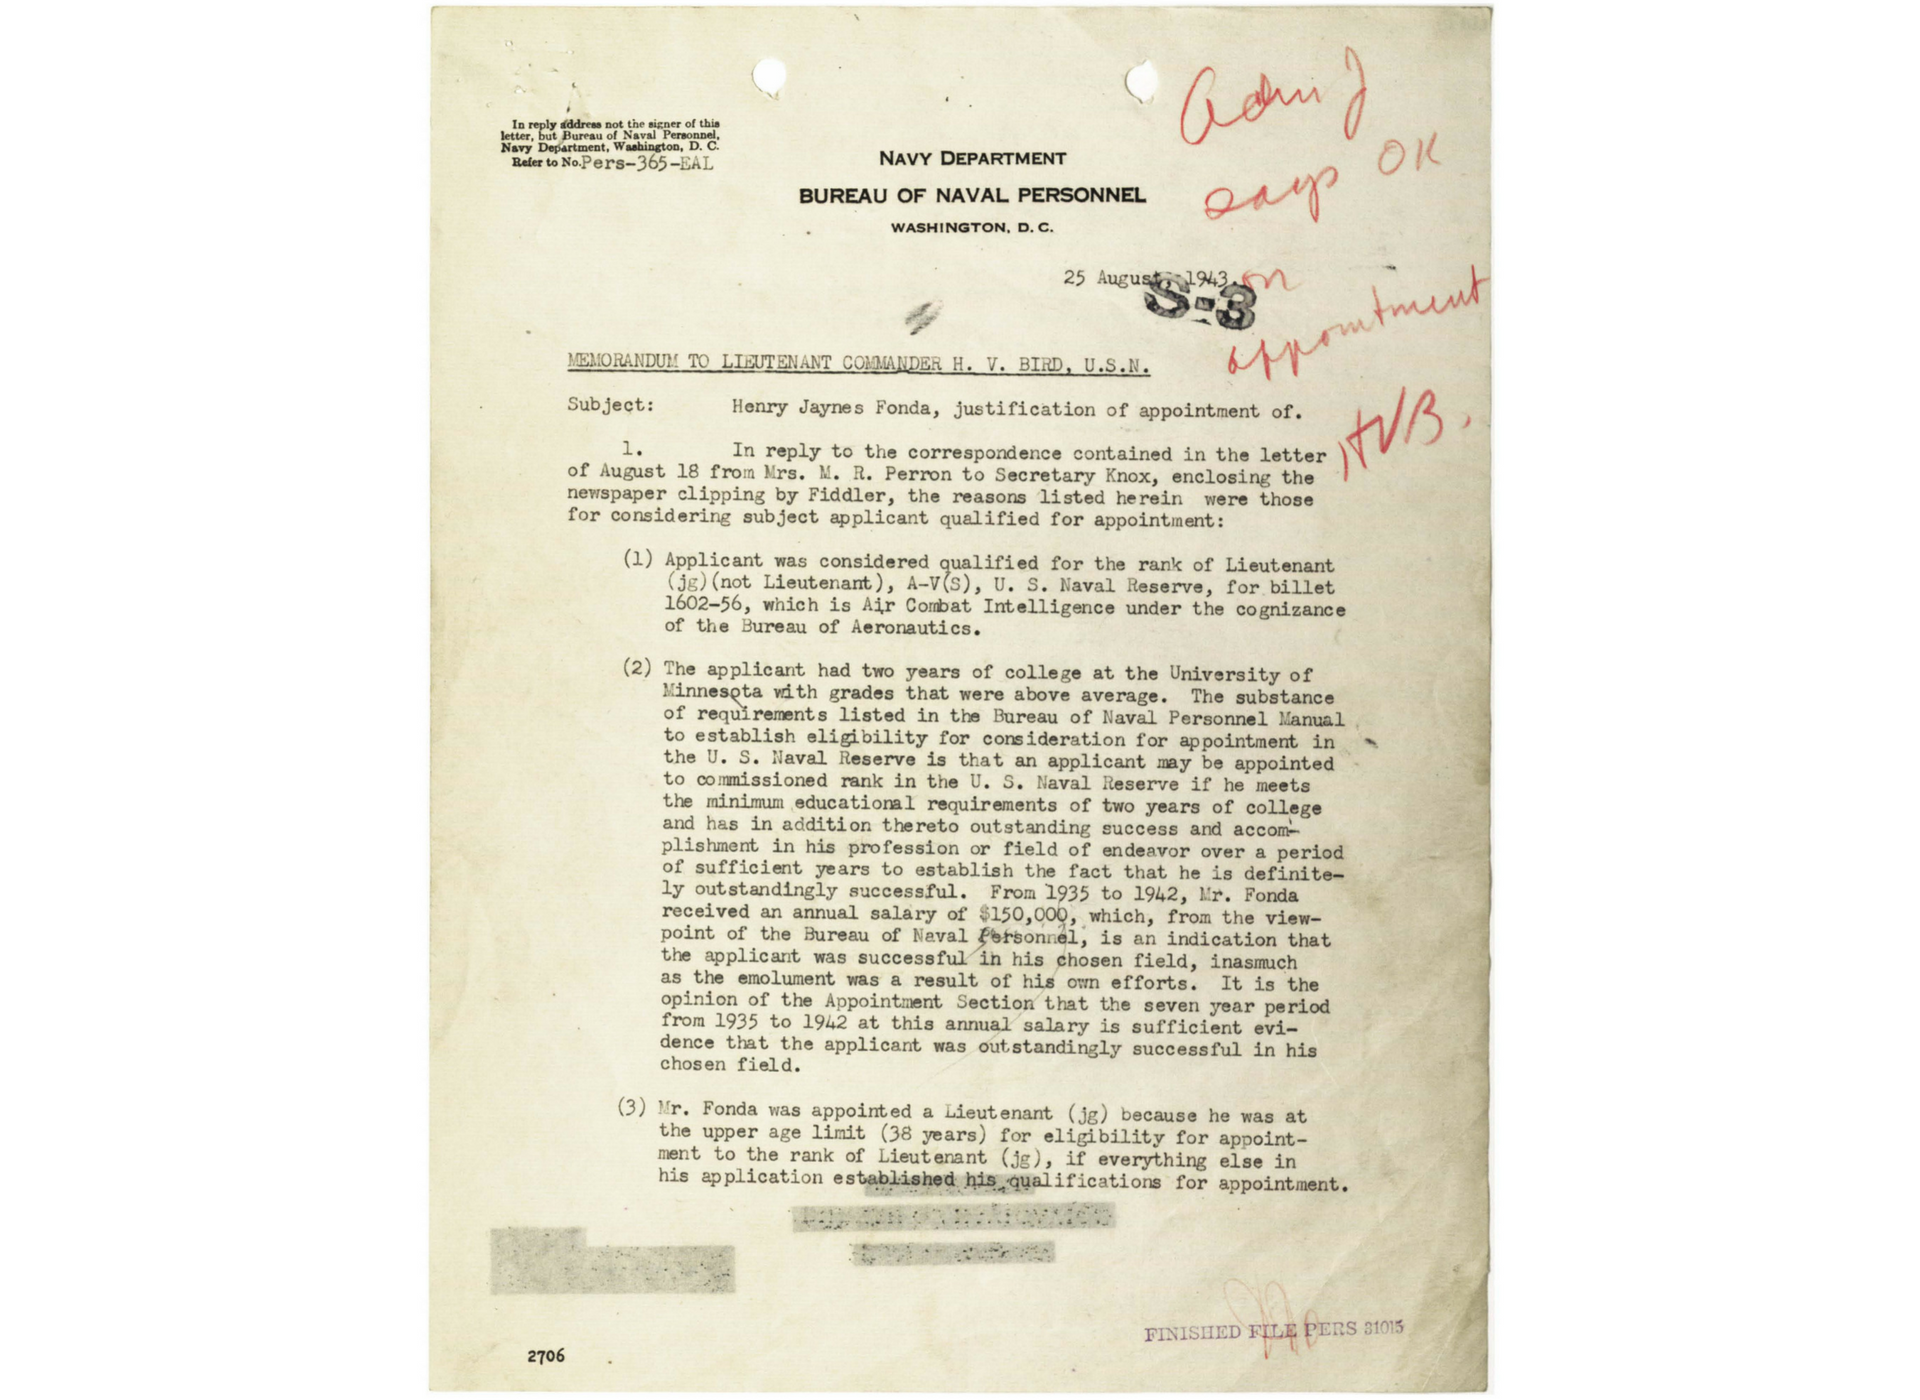 A letter justifying the appointment of Fonda to Lieutenant, junior grade. From the National Archives.